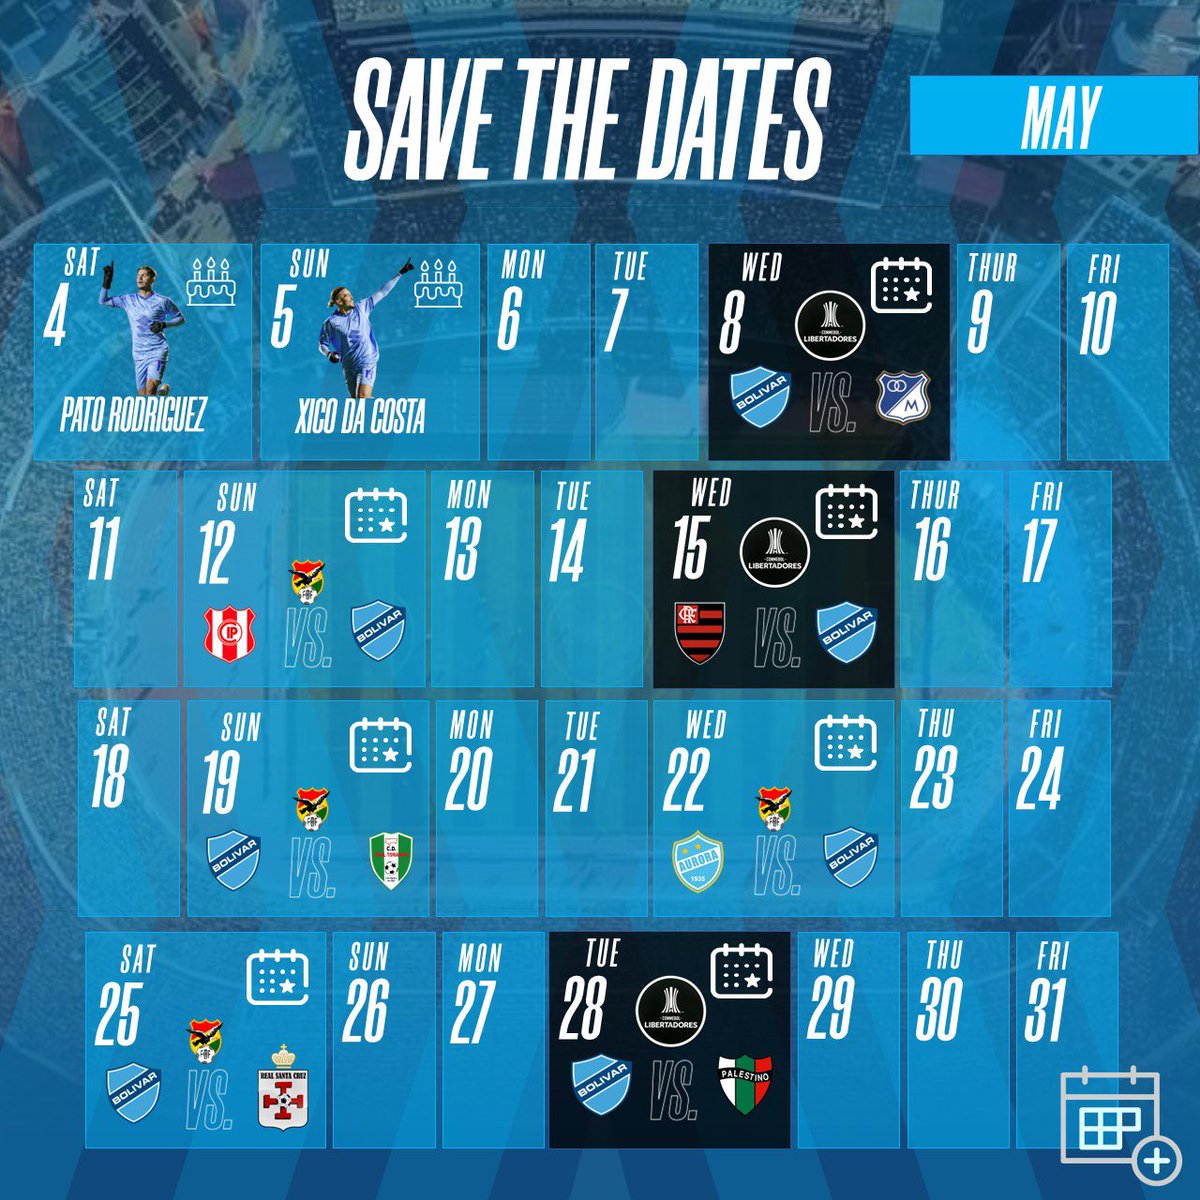 🗓️| S A V E  T H E  D A T E S❕

Check out the @Bolivar_Oficial events for the month of May 2️⃣0️⃣2️⃣4️⃣

 #ClubBolivar|| #Bolivar || #BolivarNews 
Follow us linktr.ee/Bolivarnews